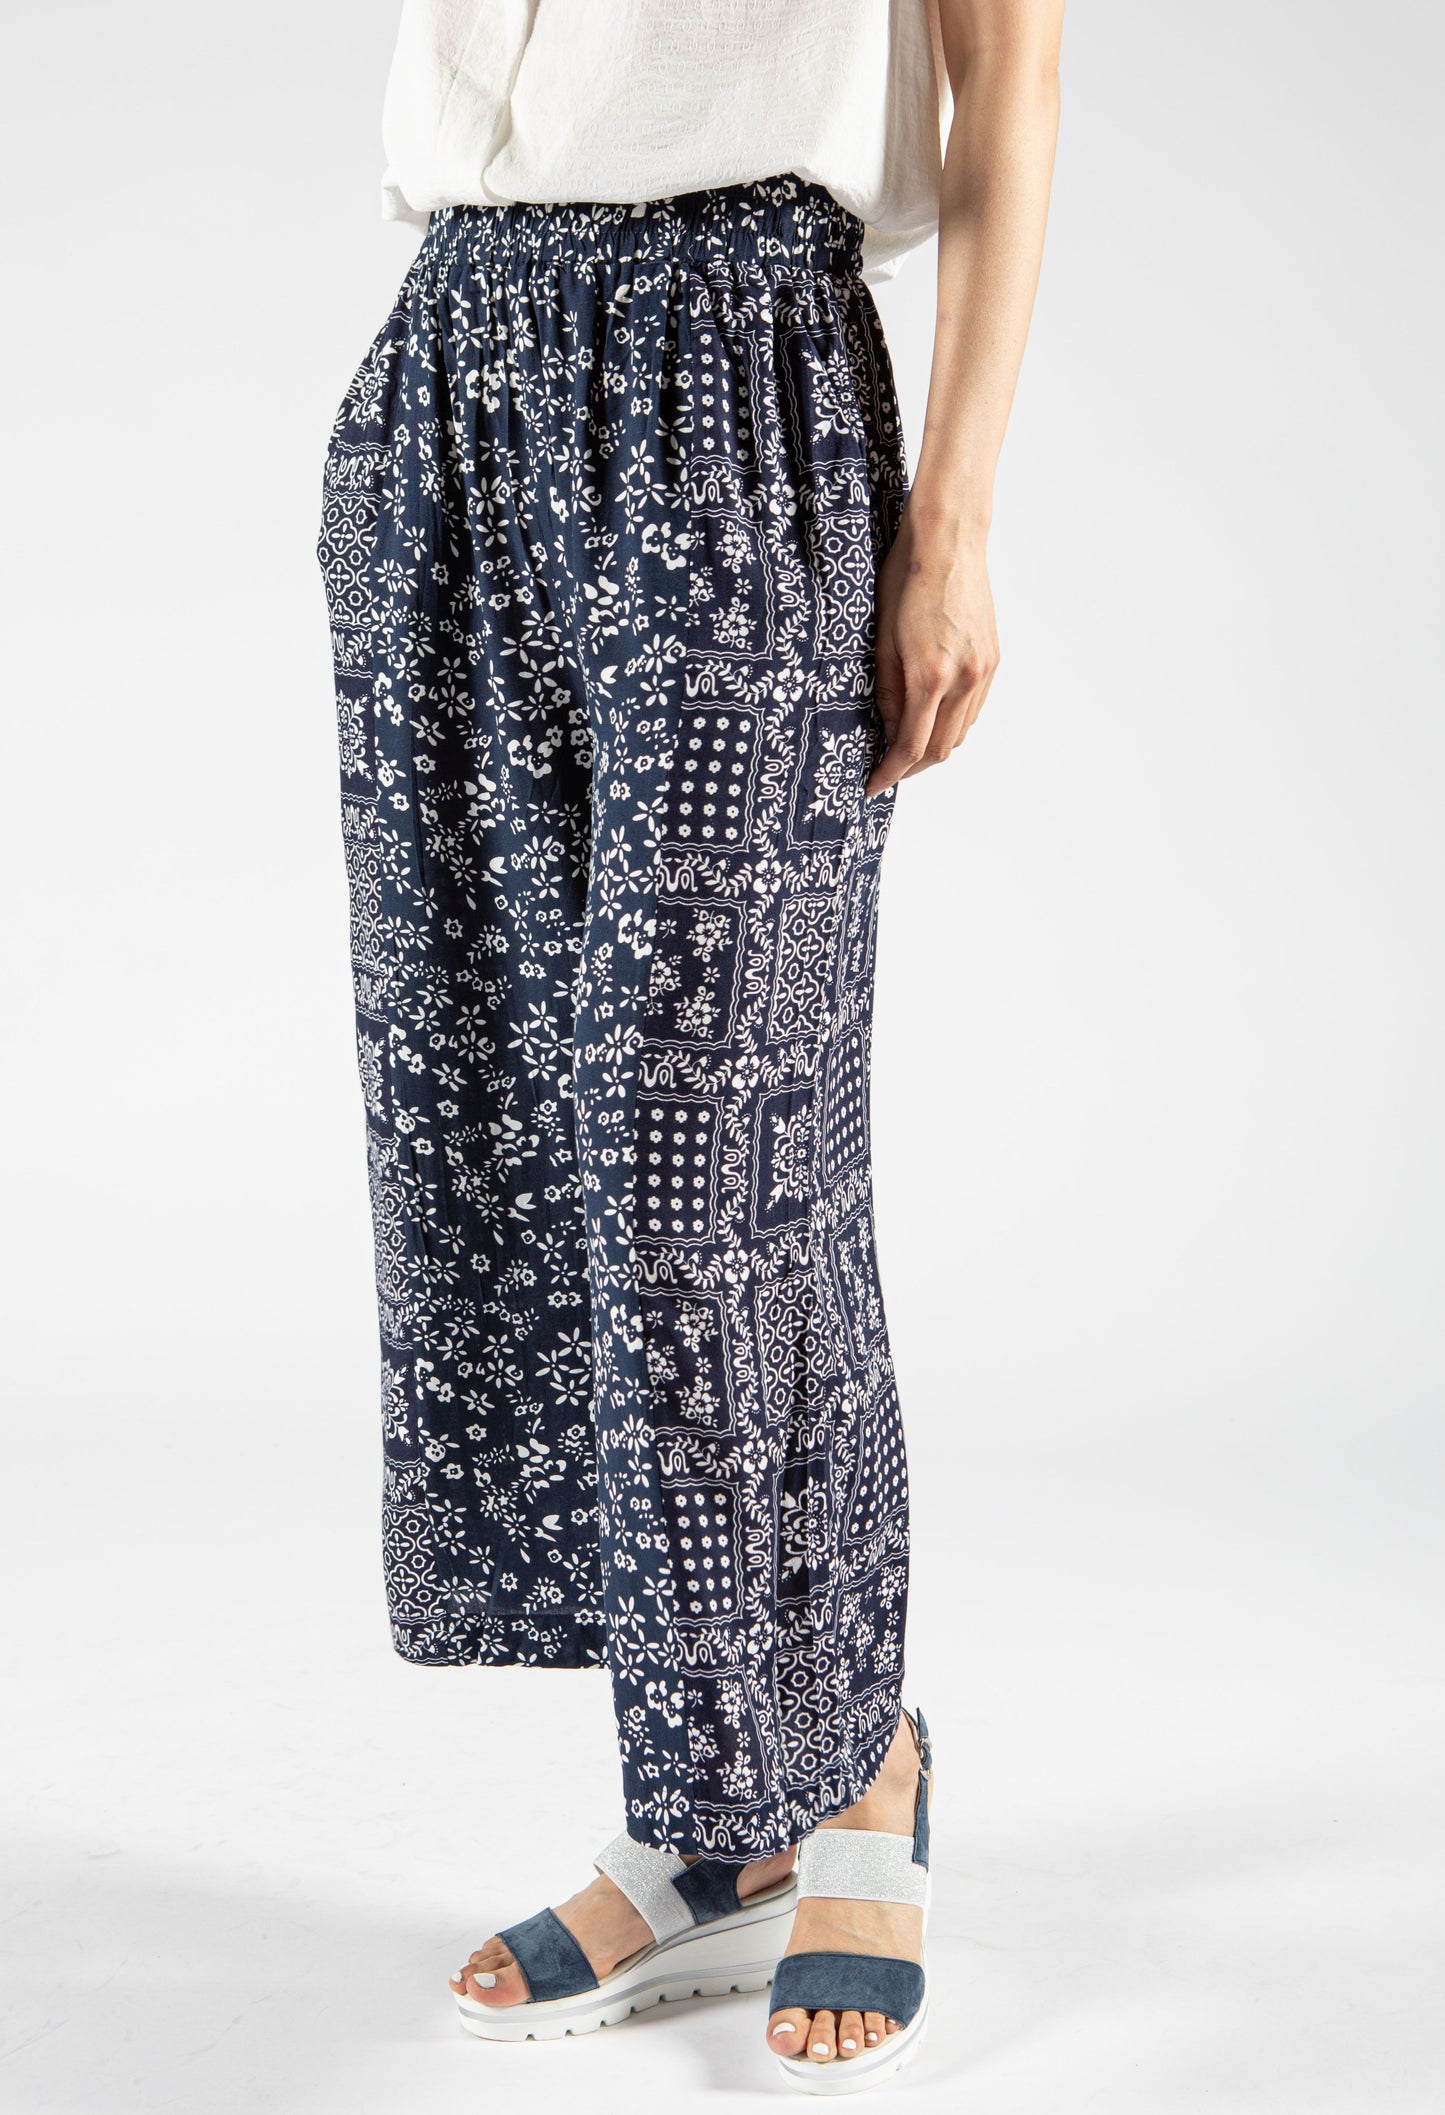 Boho Style Patterned Trousers